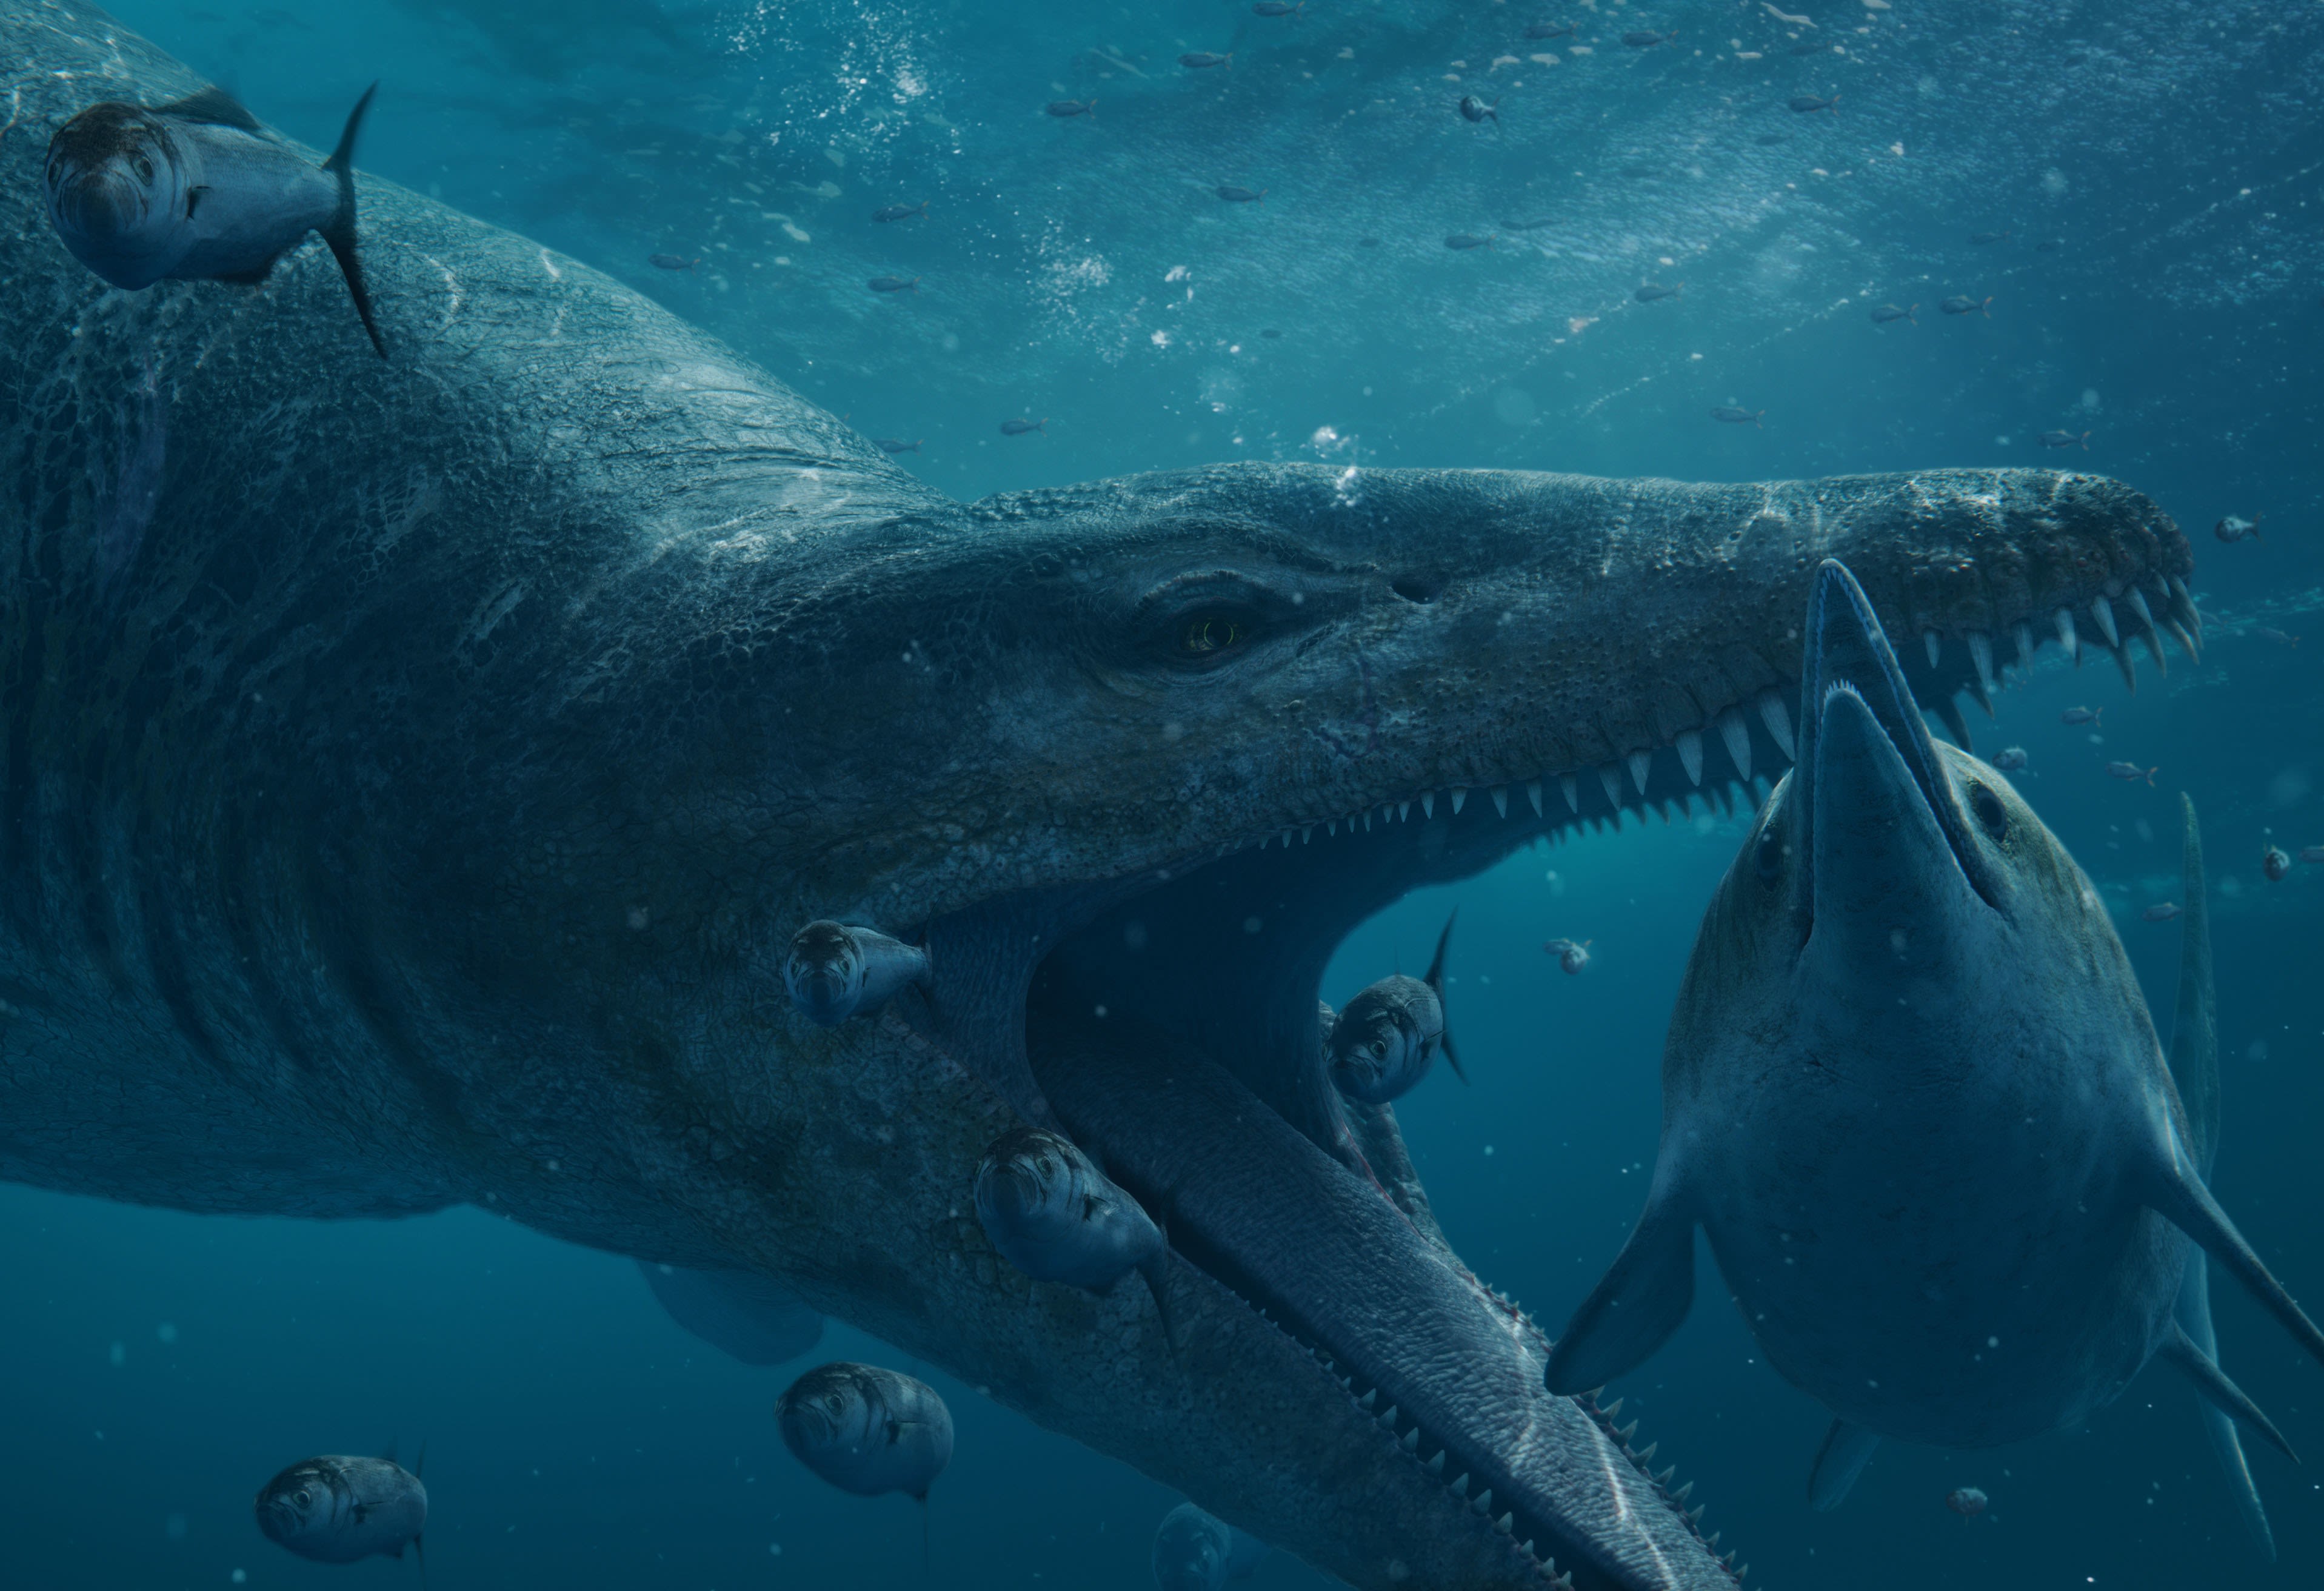 Illustration of a pliosaur eating a dolphin. Its jaws are about the size of the dolphin's body